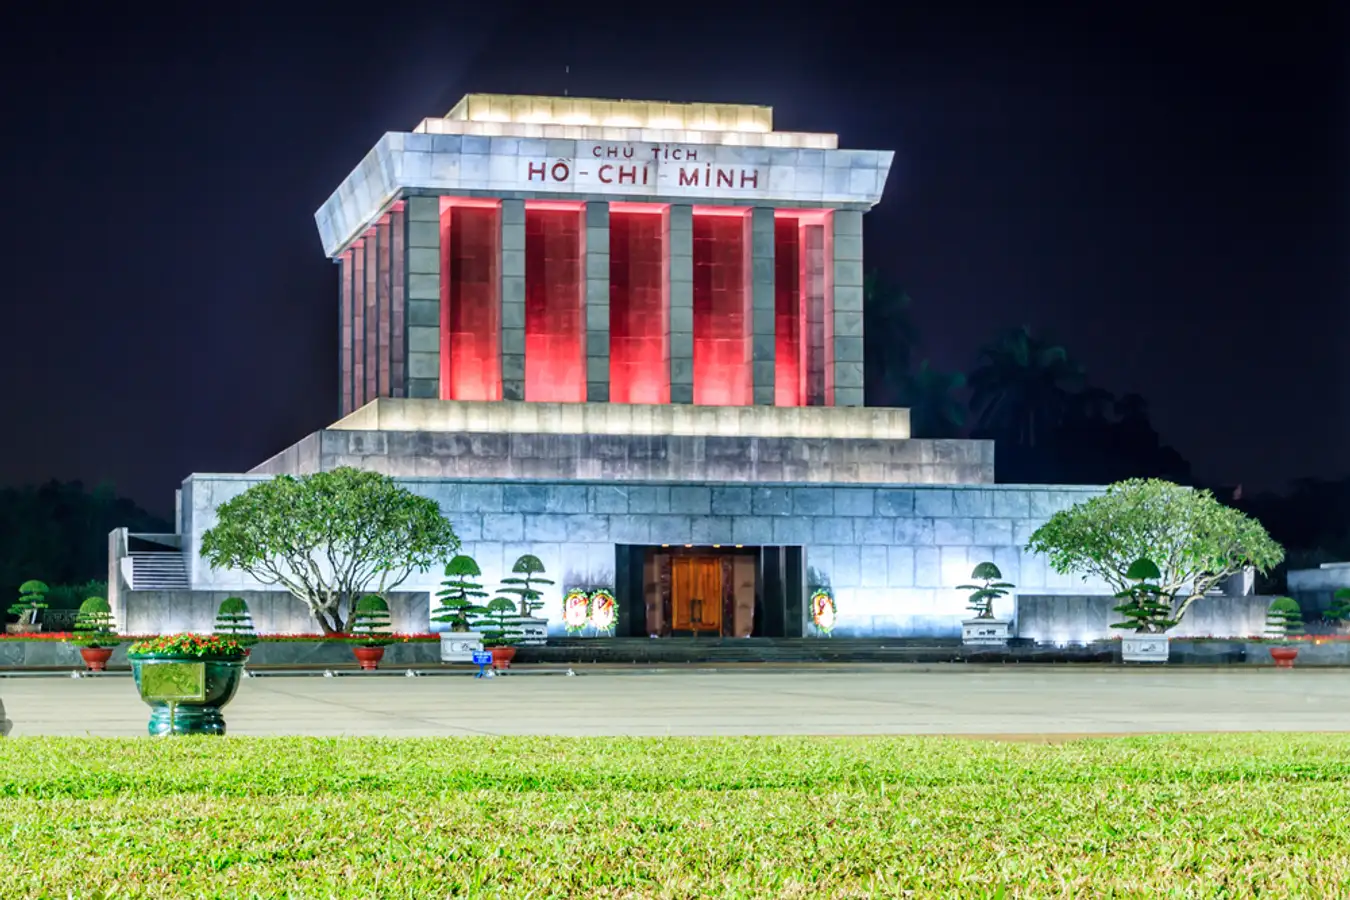 A majestic view of the Ho Chi Minh Mausoleum, a symbol of Vietnam's rich history and tribute to Ho Chi Minh's legacy.